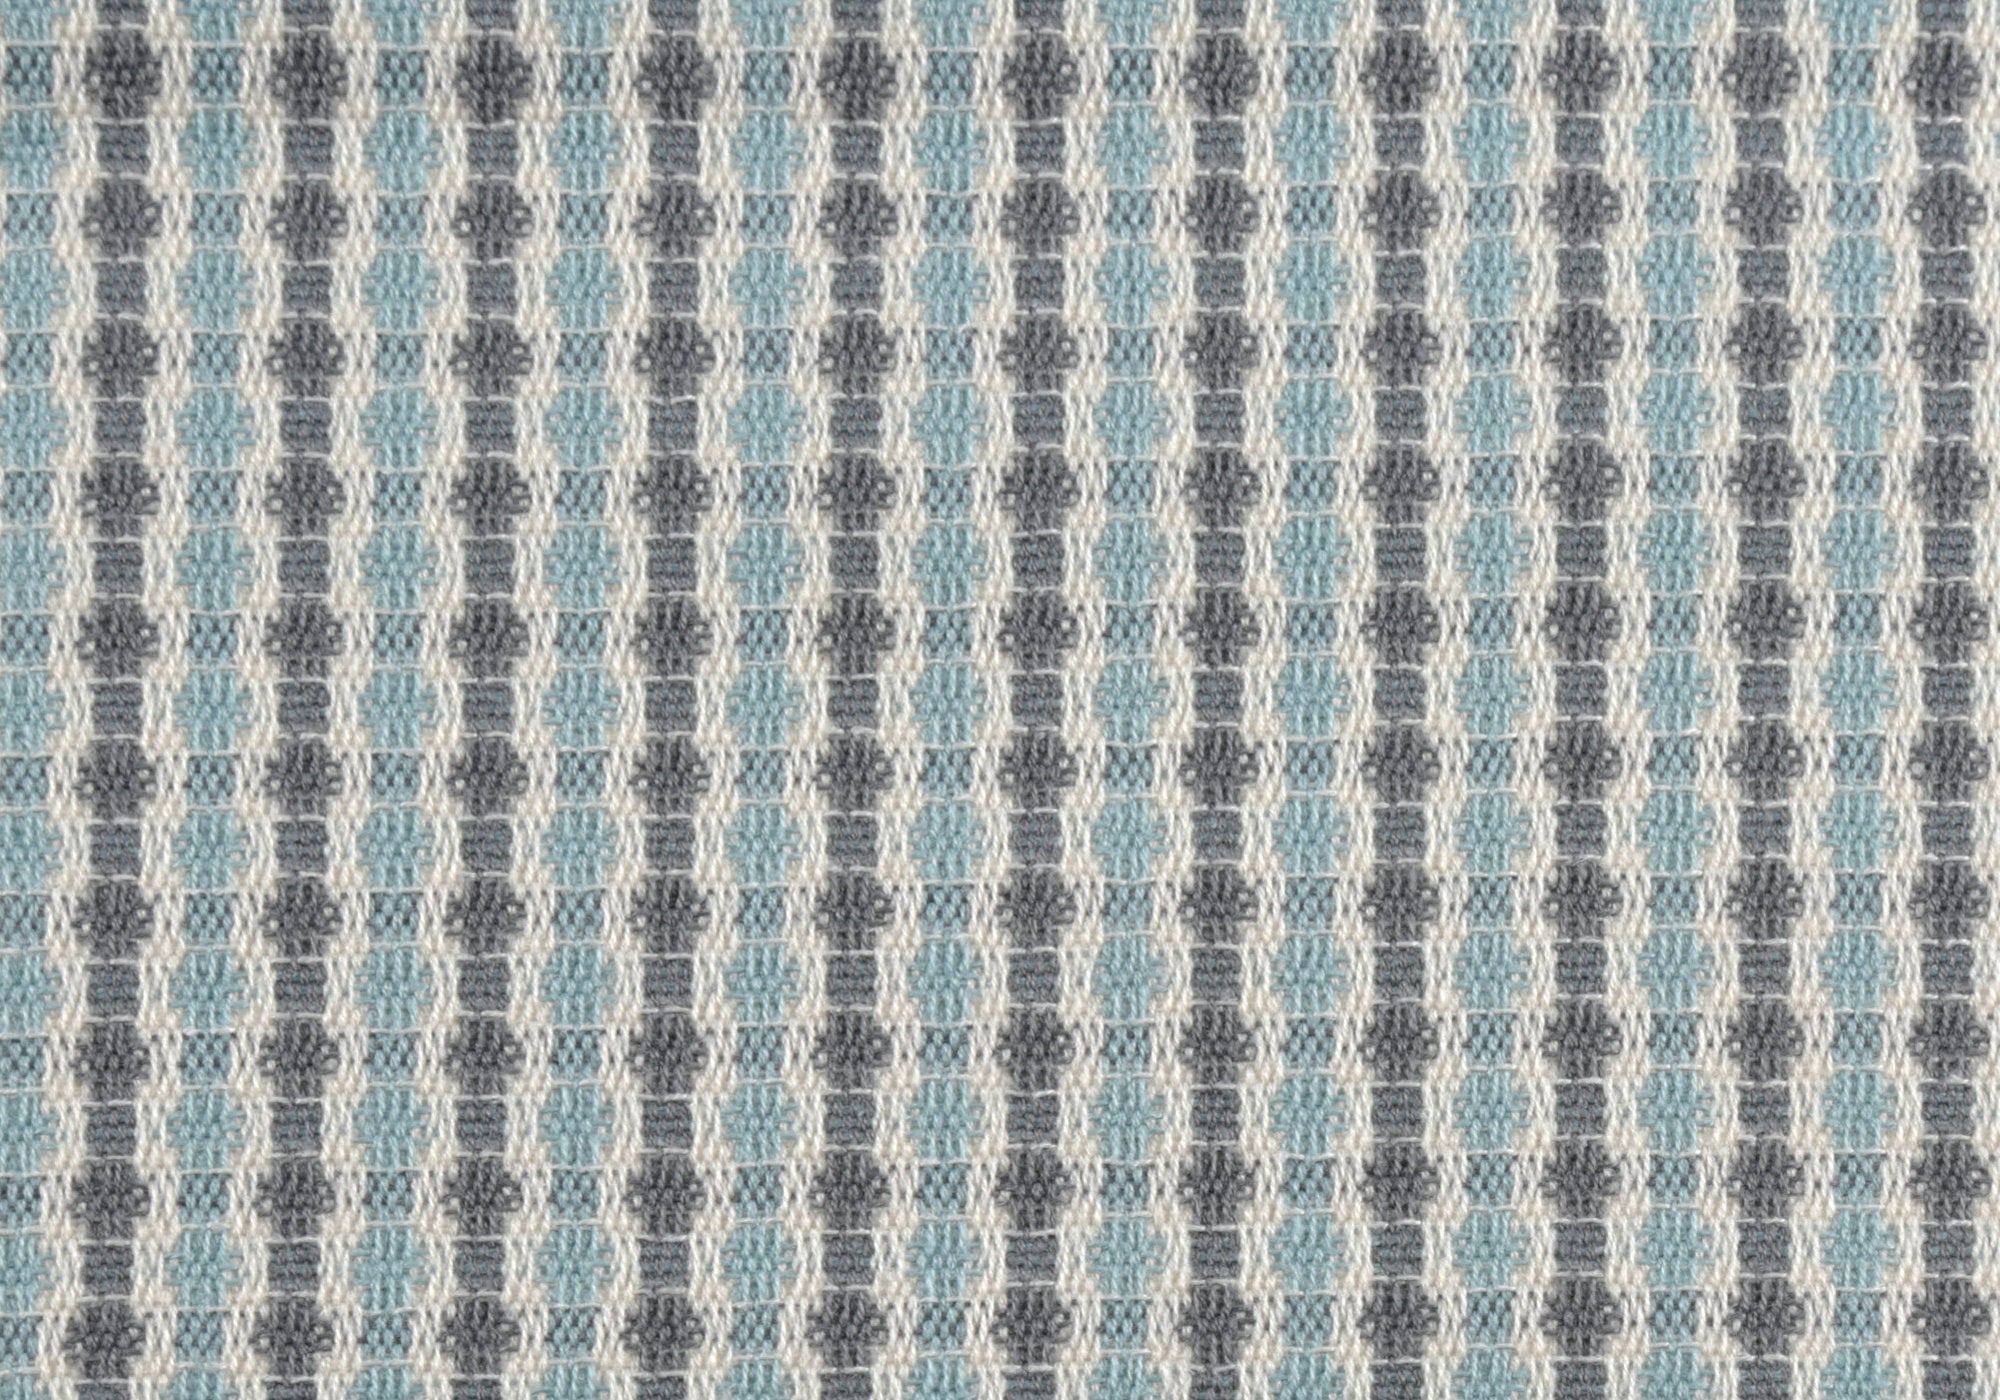 Accent Chair - Light Blue / Grey Abstract Dot Fabric